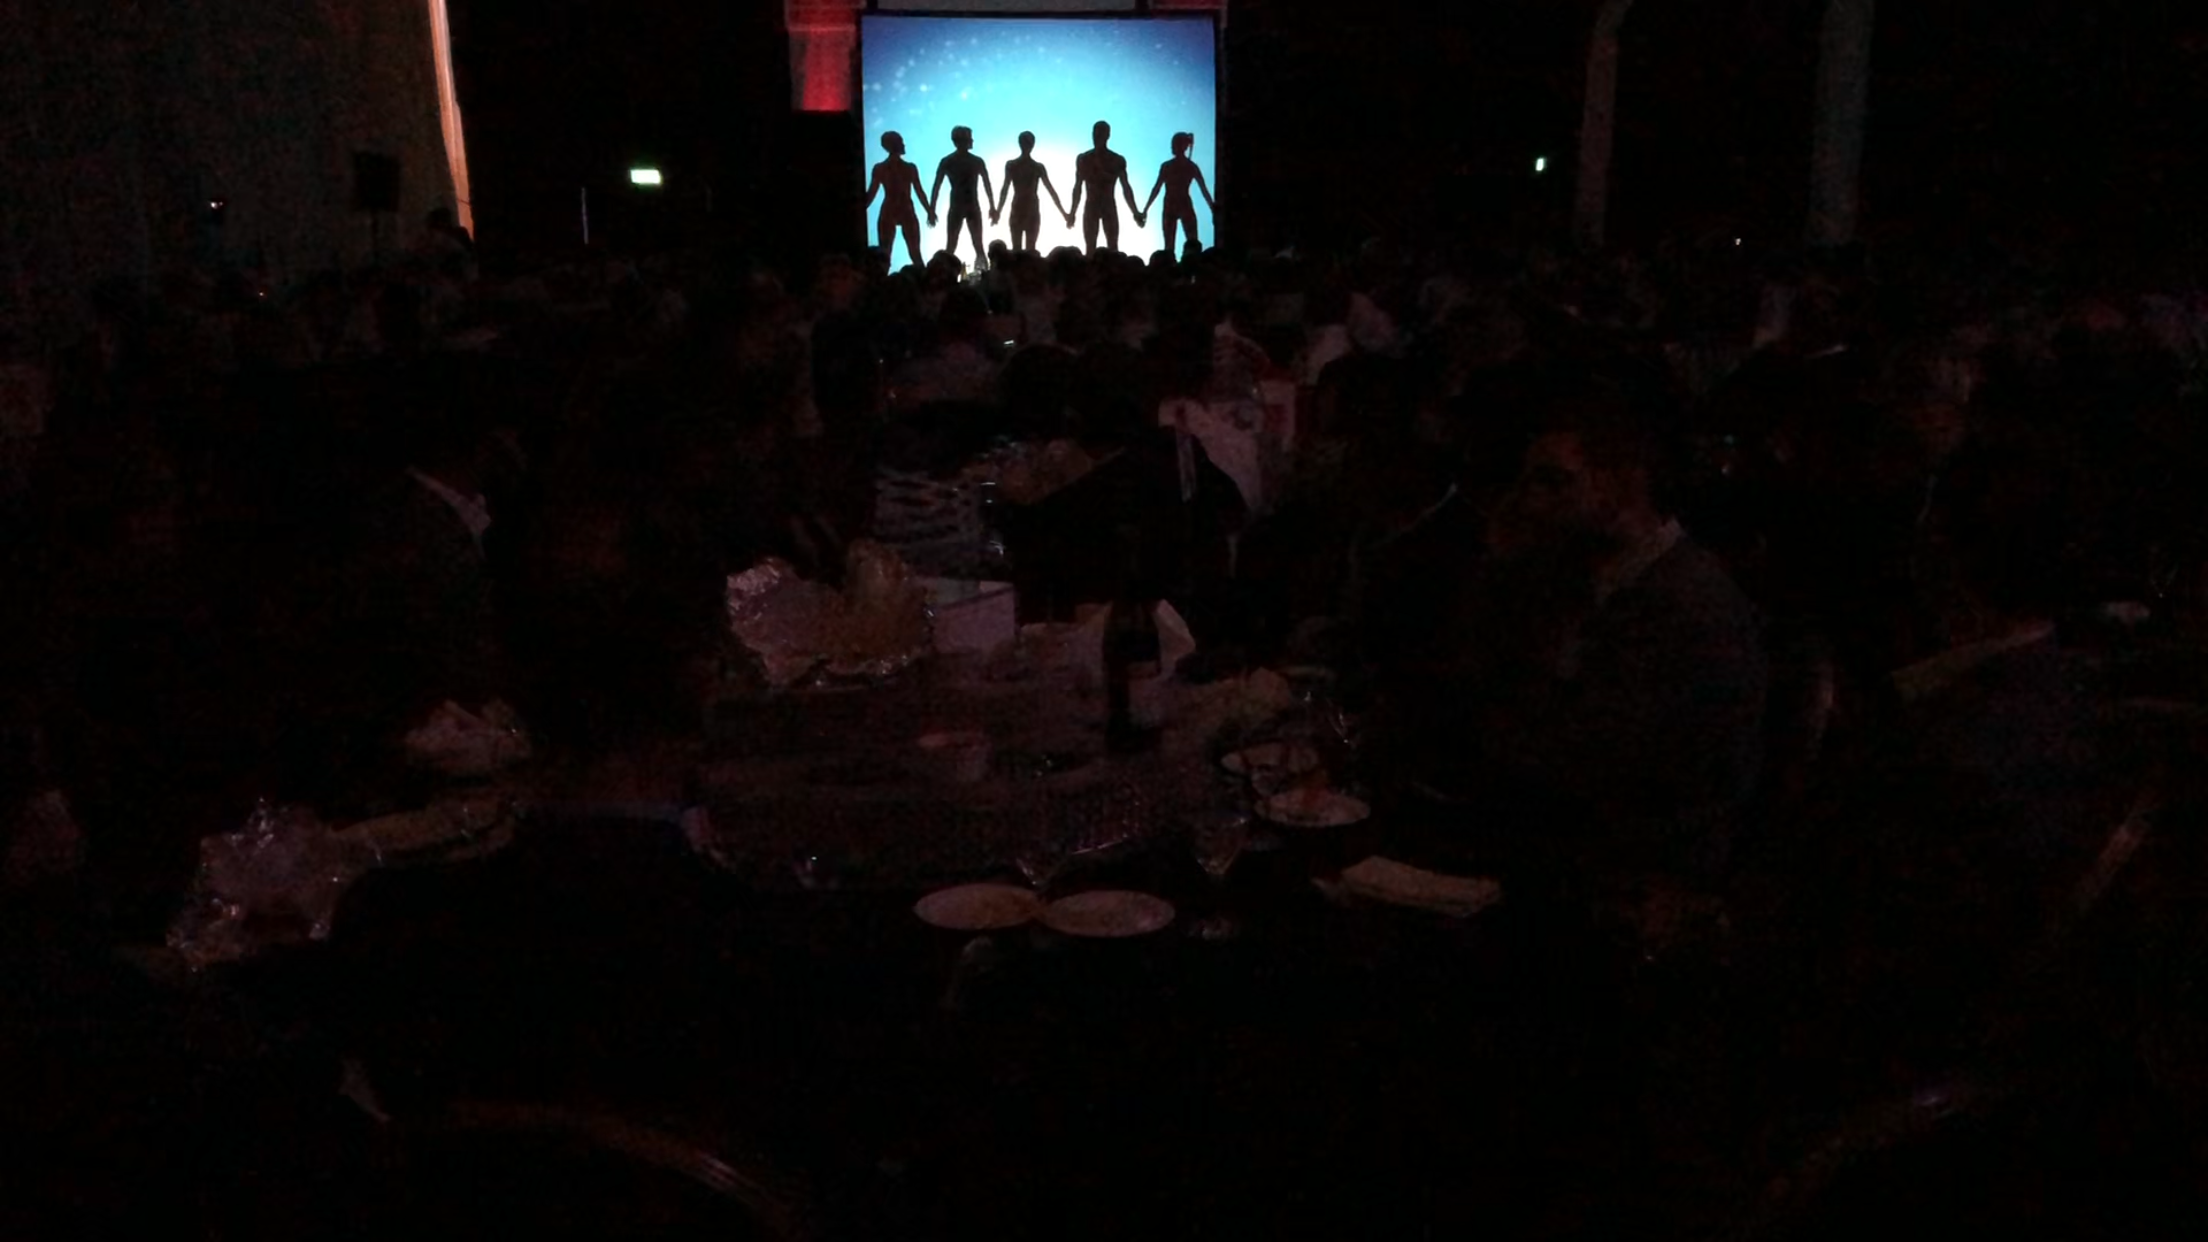 Shadow Show Performs for Retail’s Best Forecourt & Convenience Event 2019